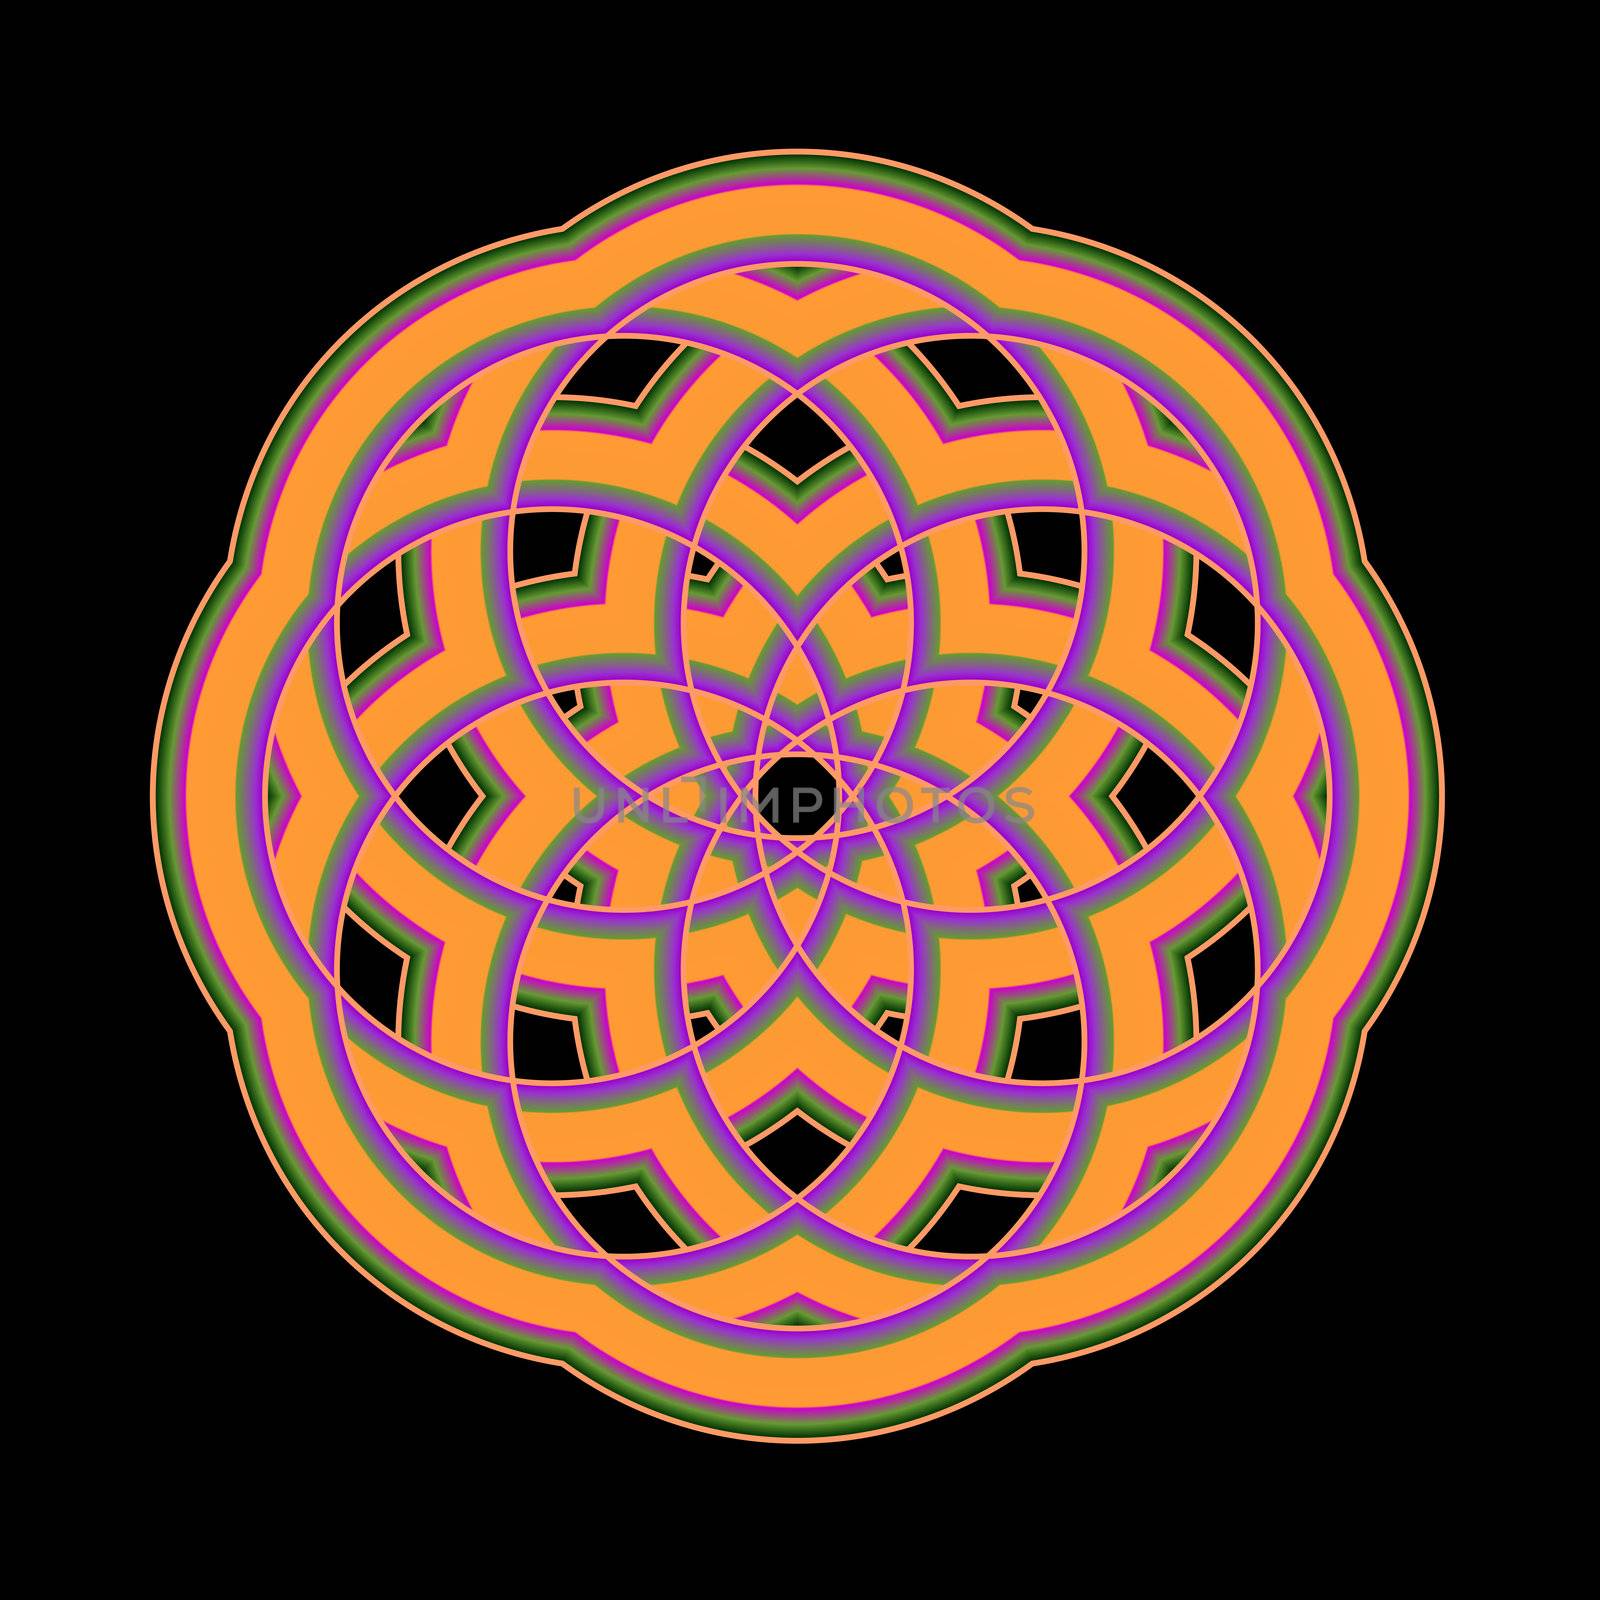 An abstract fractal illustration in a mandala shape that is done in orange, purple, and green.